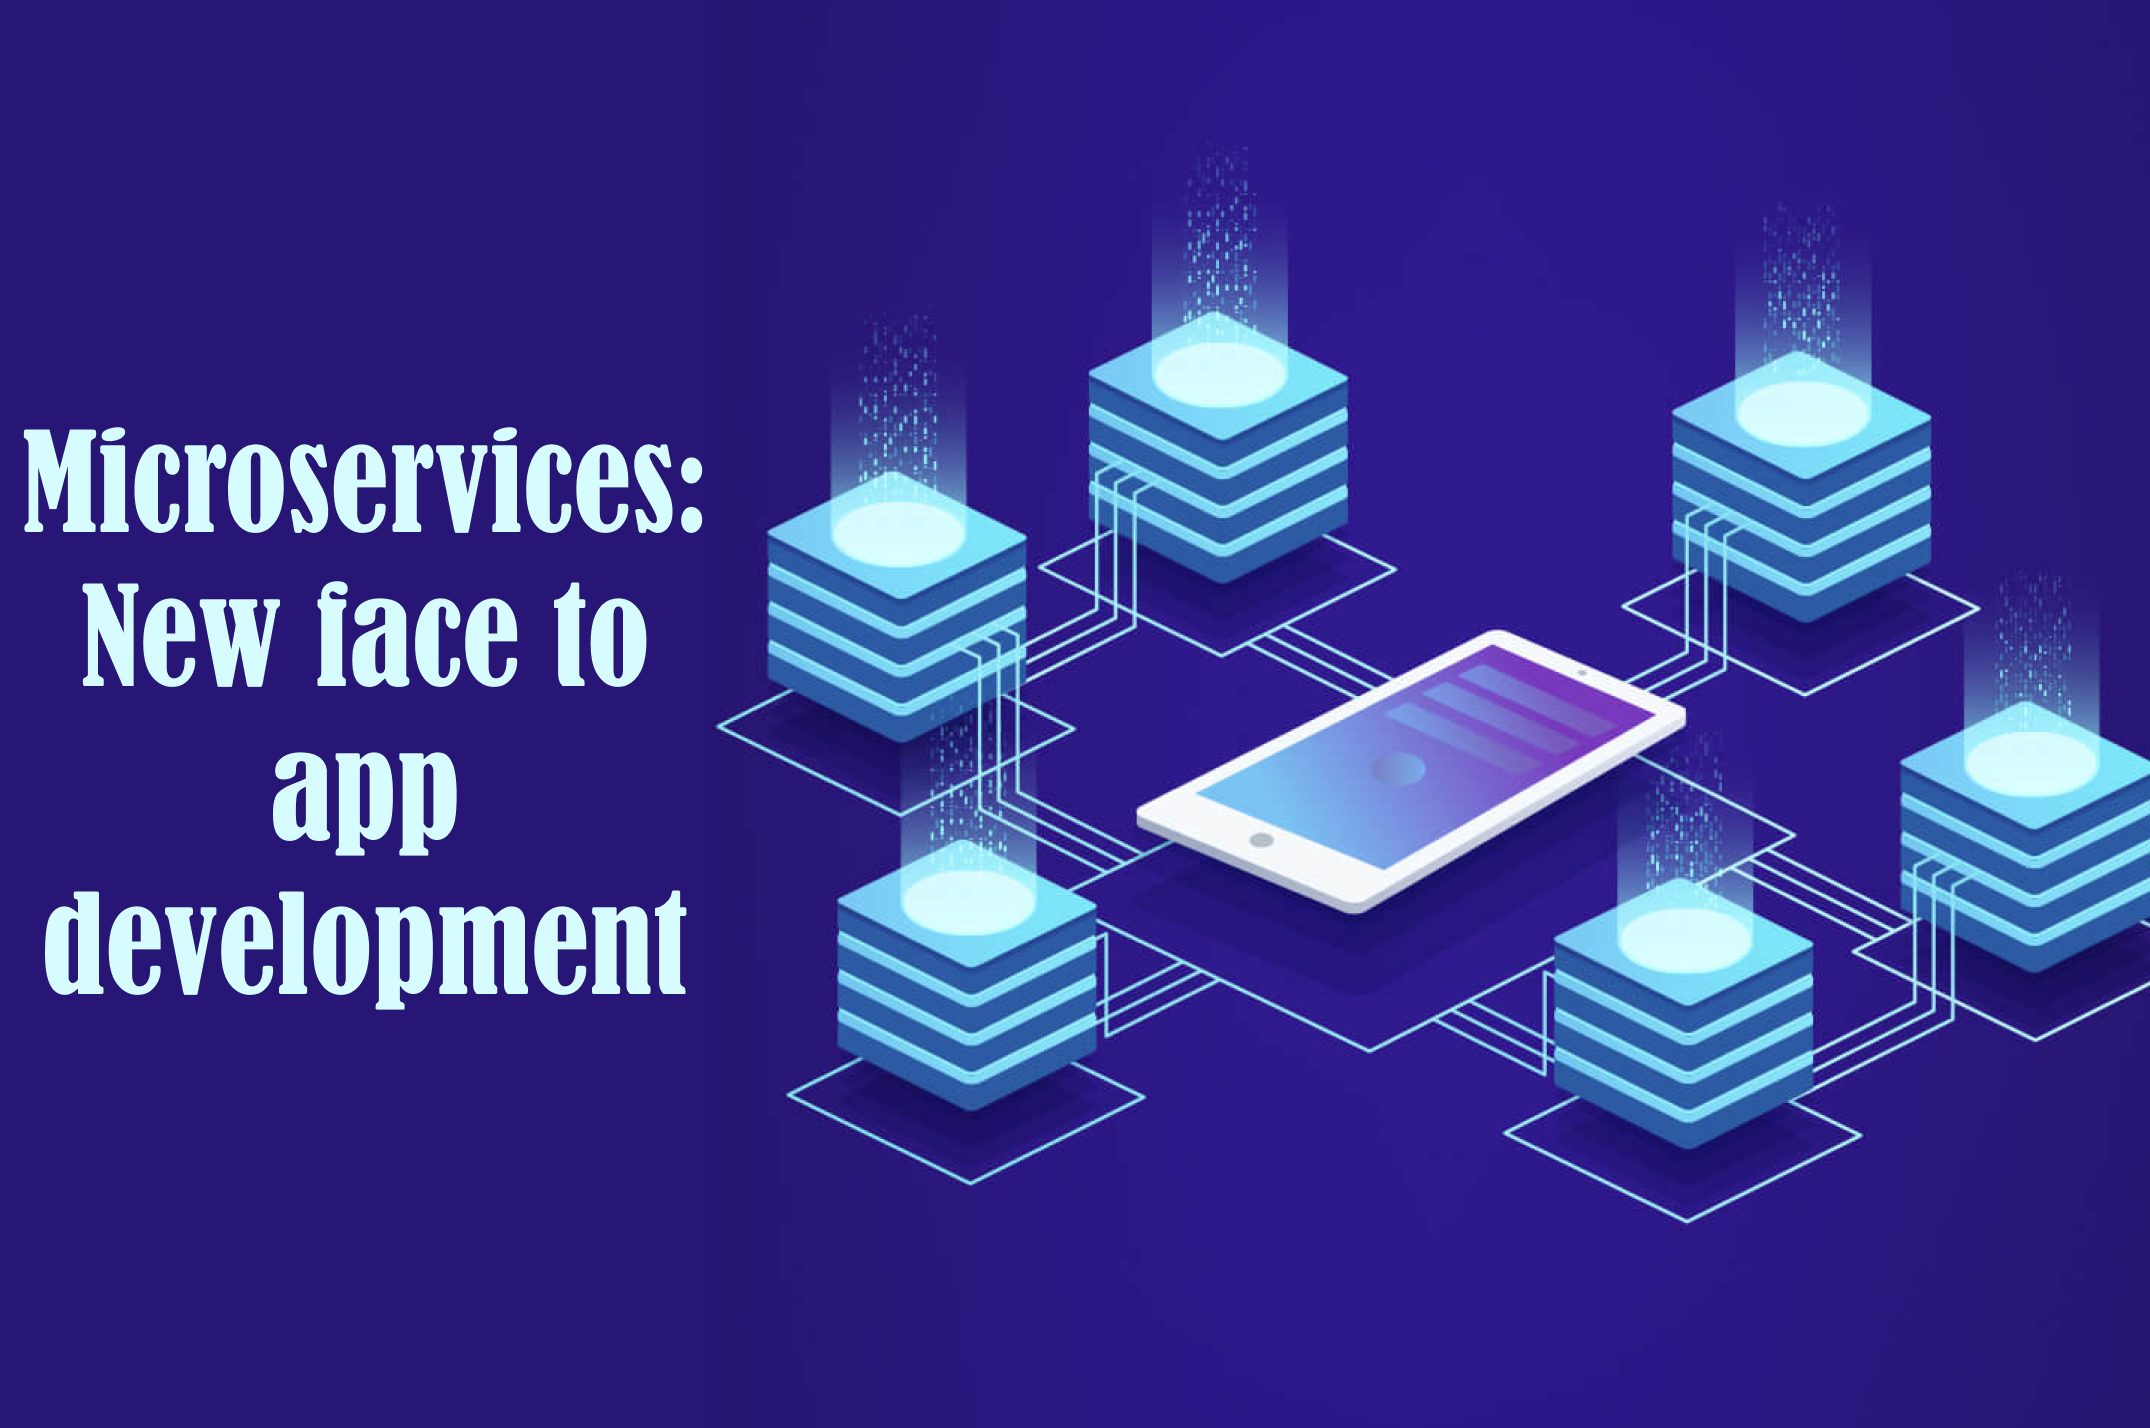 Microservices: New face to app development